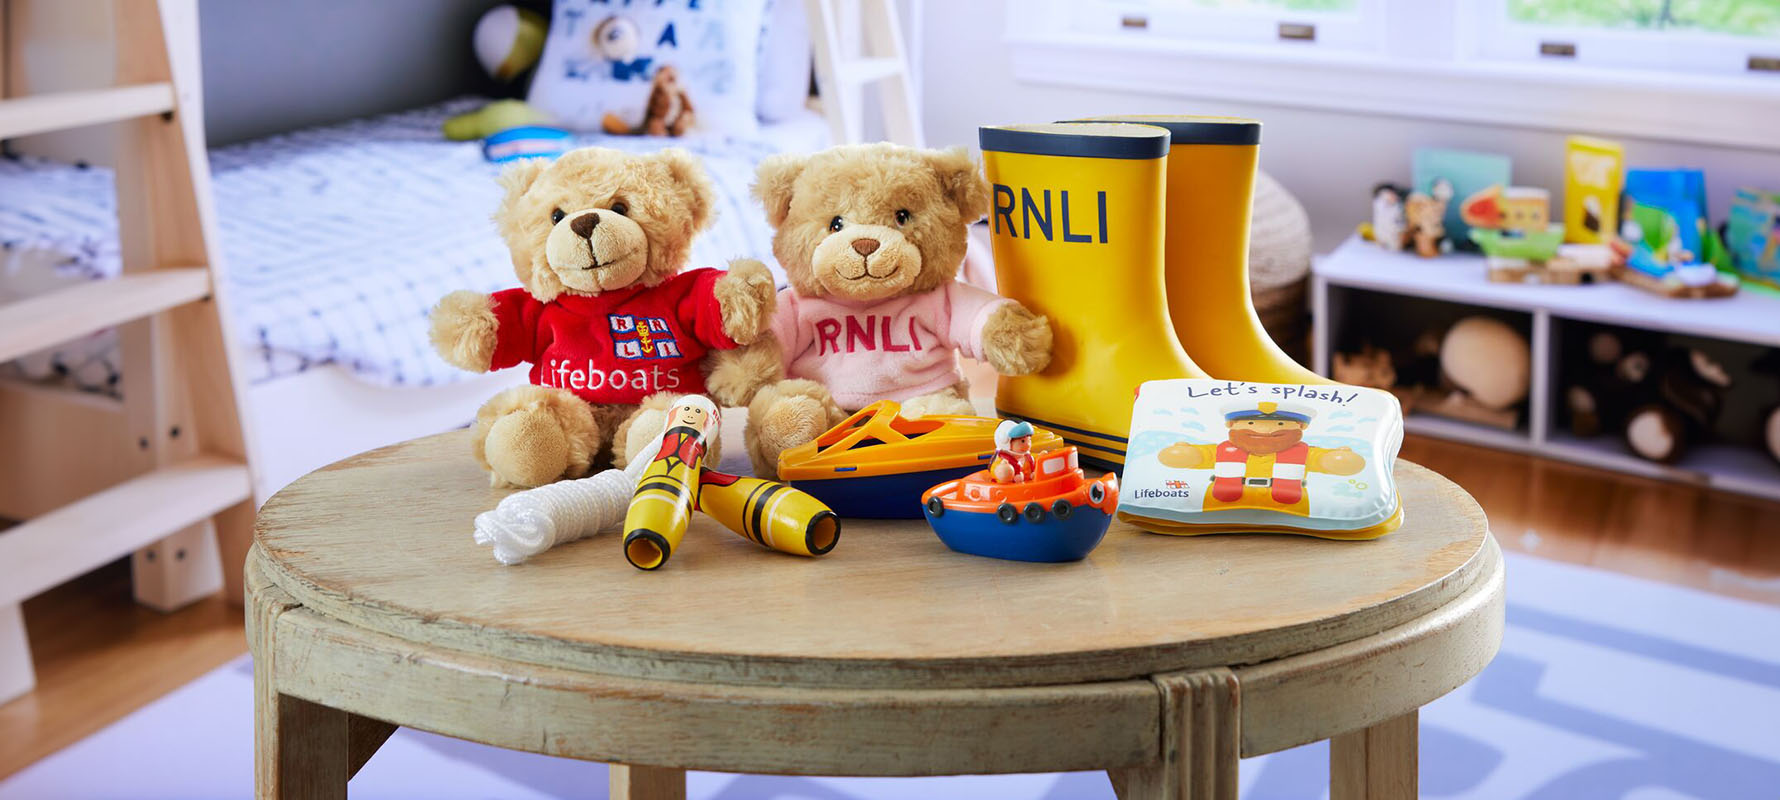 A wooden table with some kids’ toys on it, including two RNLI teddy bears, a pair of RNLI welly boots, and beach games. The table is in a child’s room and there is a bunkbed and toy storage in the background.